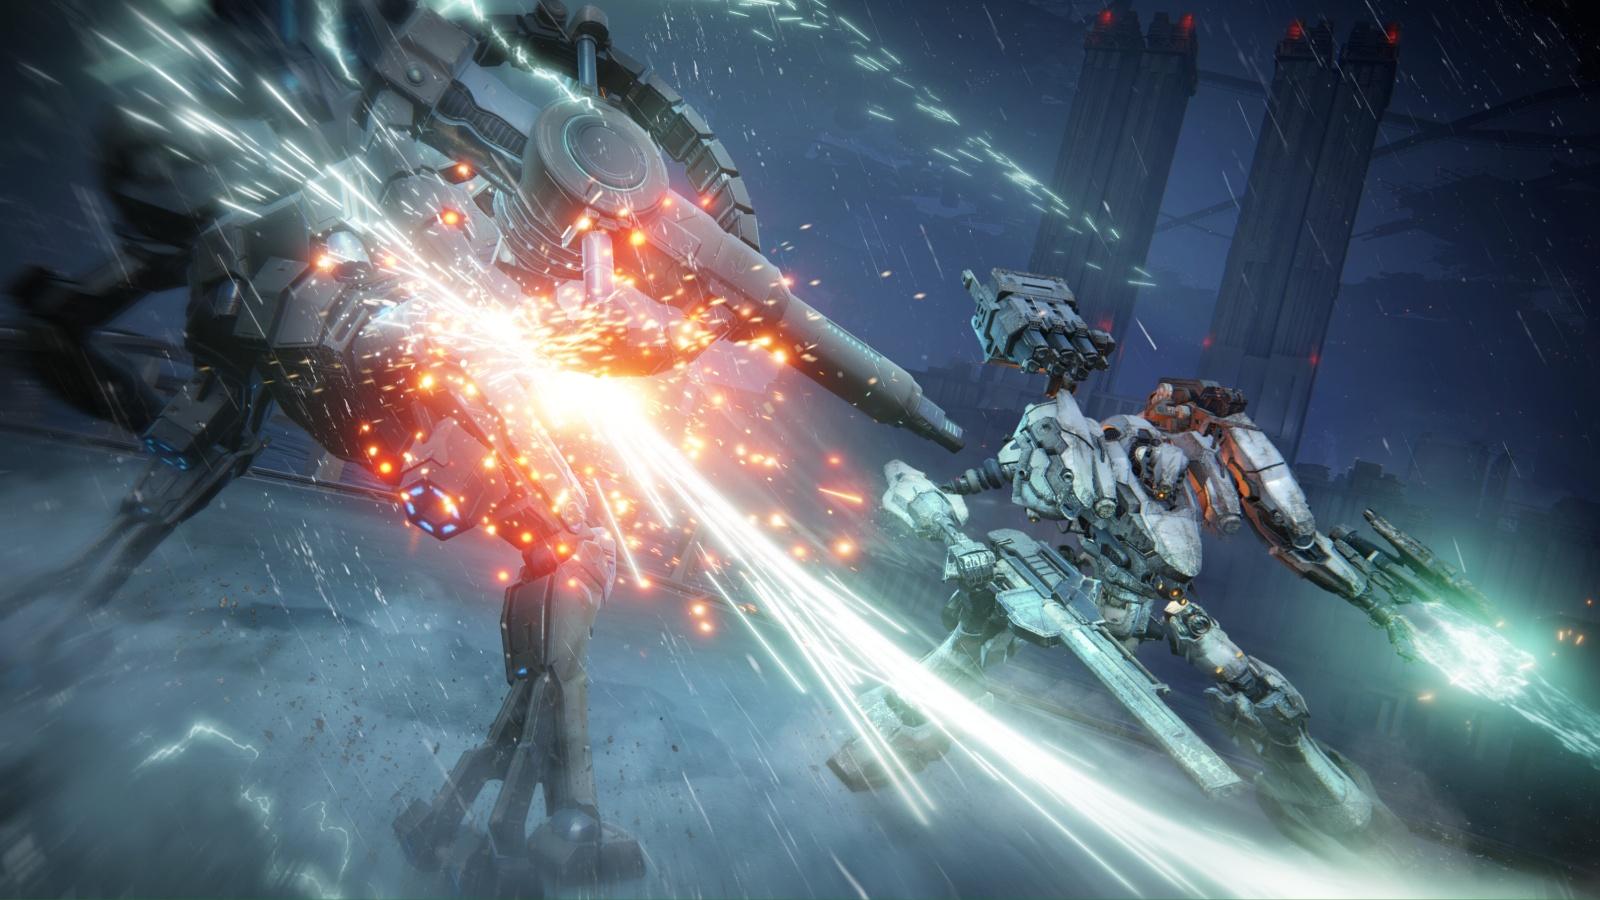 A screenshot from the game Armored Core 6